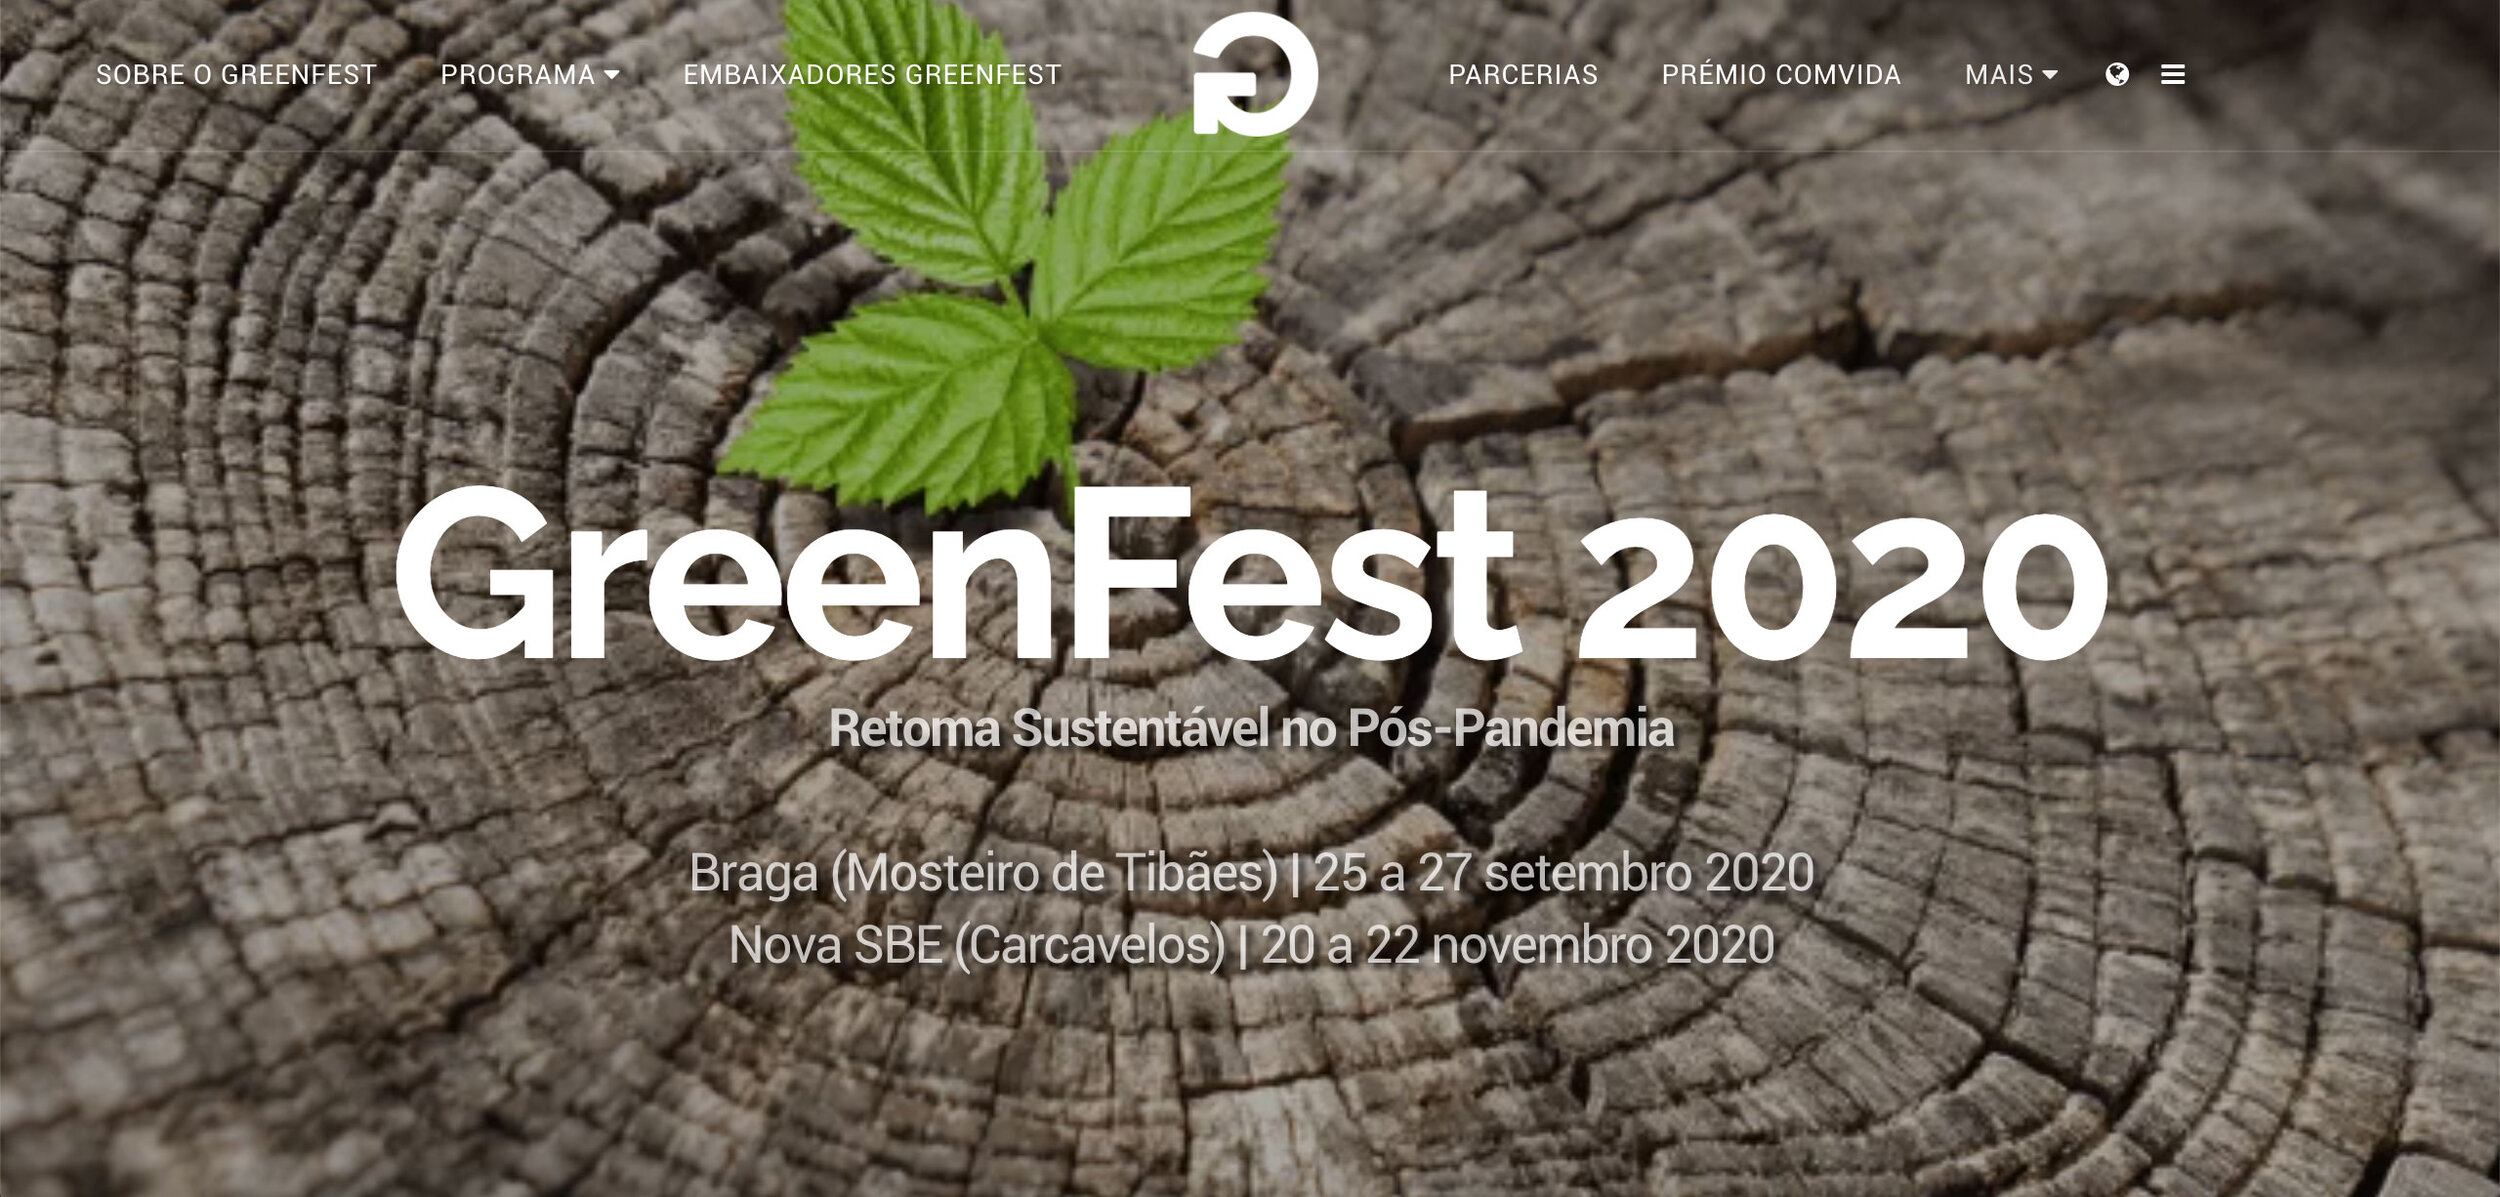 INL engages with a sustainable post-pandemic at the Greenfest 2020